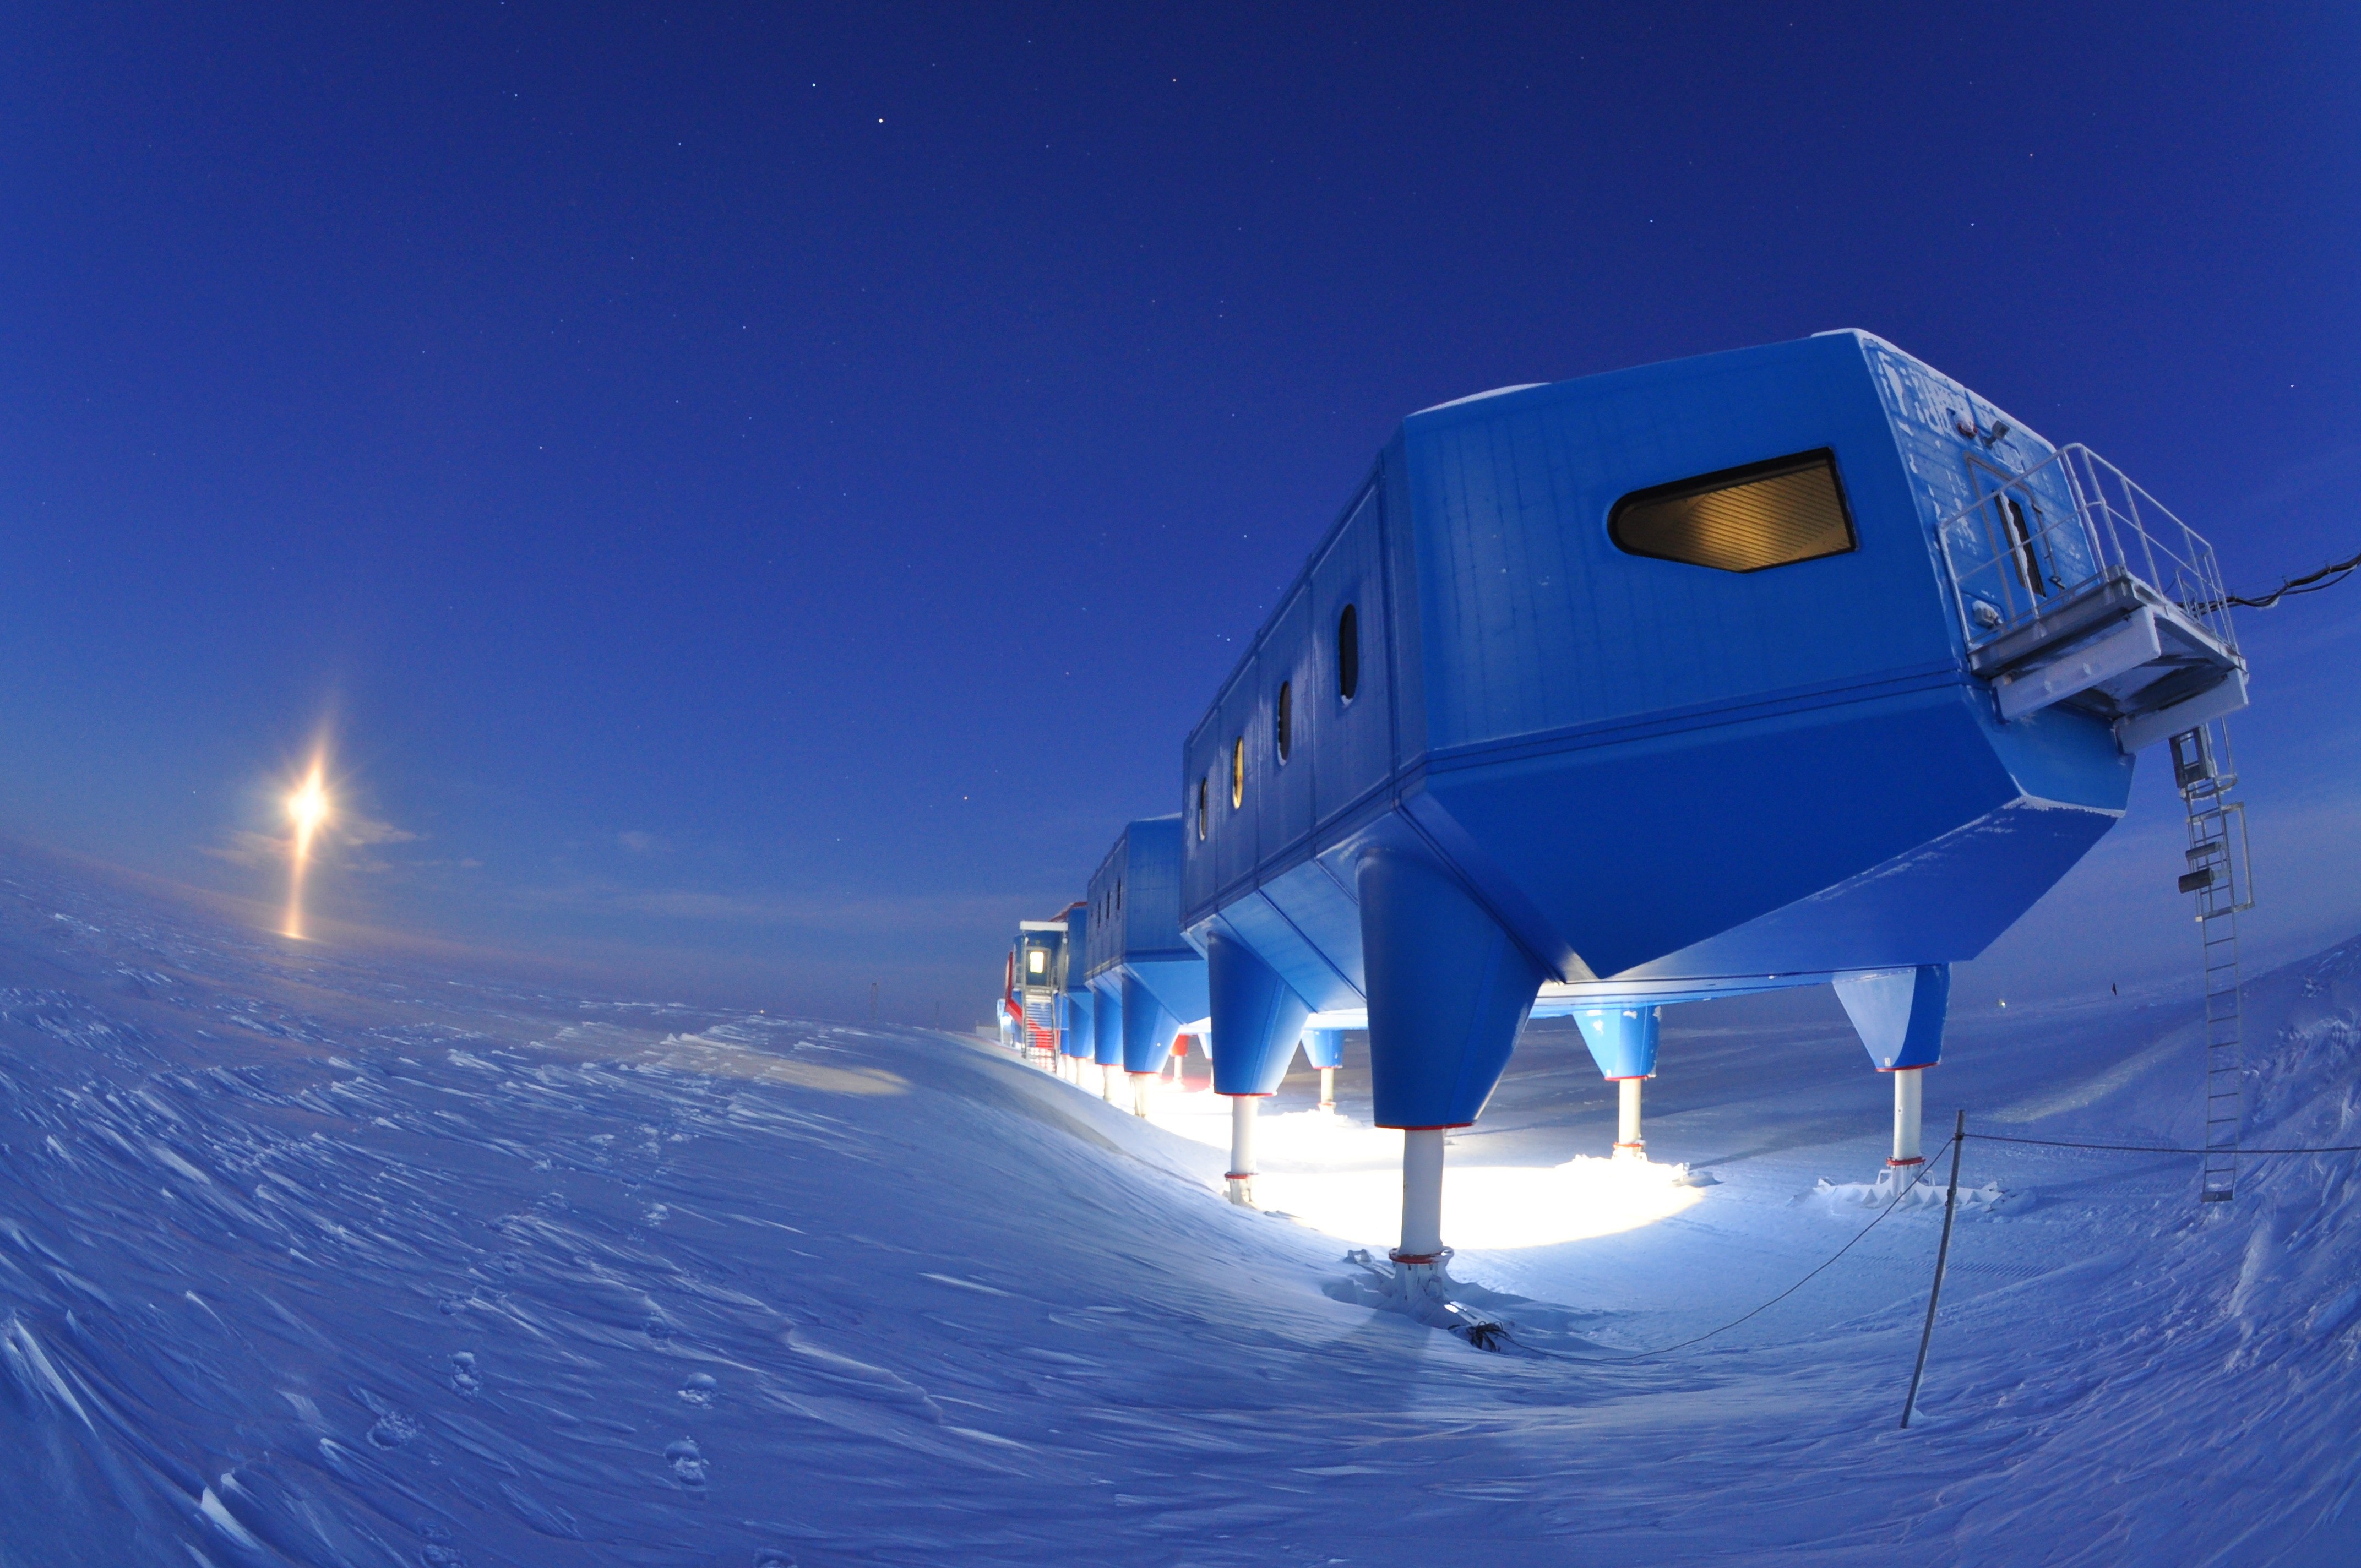 General 4288x2848 nature landscape Concordia Research Station Antarctica snow ice evening science technology laboratories building Moon moonlight clear sky fisheye lens lights